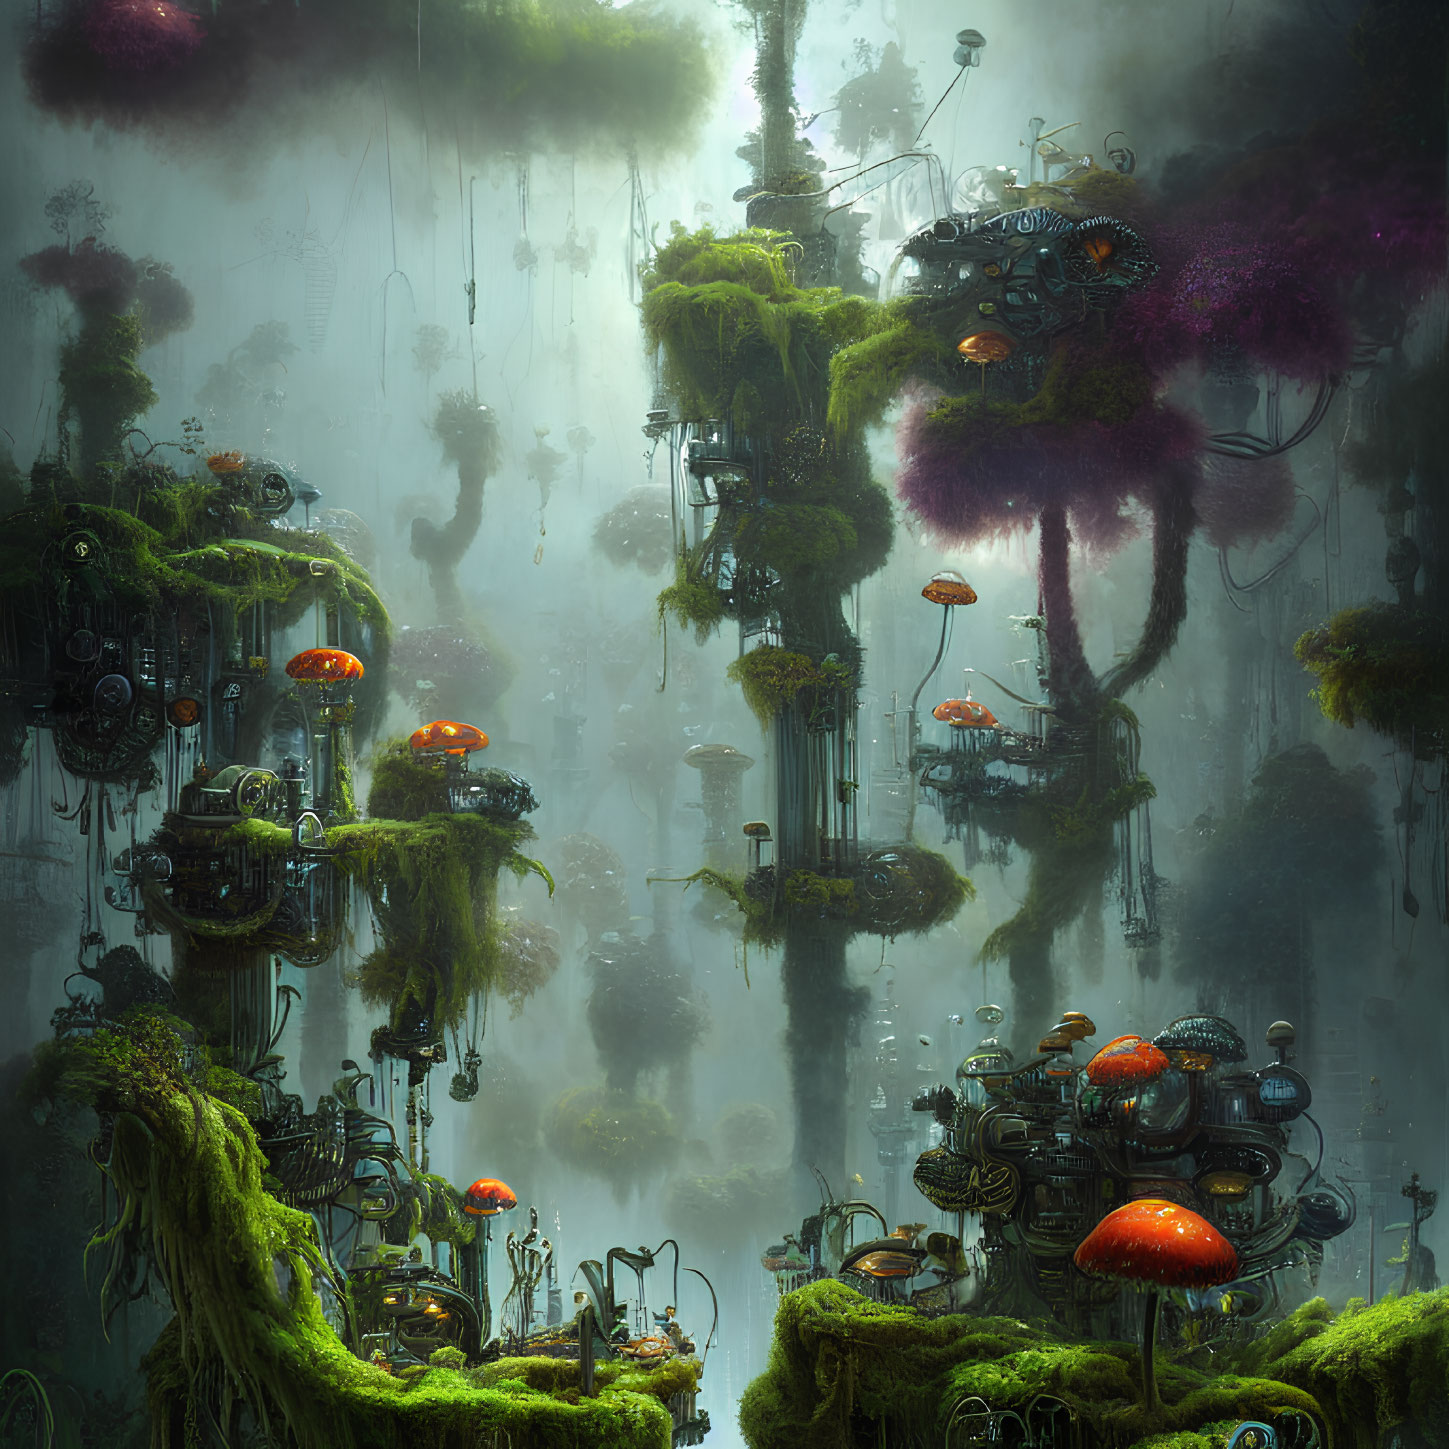 Futuristic forest with moss-covered structures, bioluminescent fungi, and advanced machinery